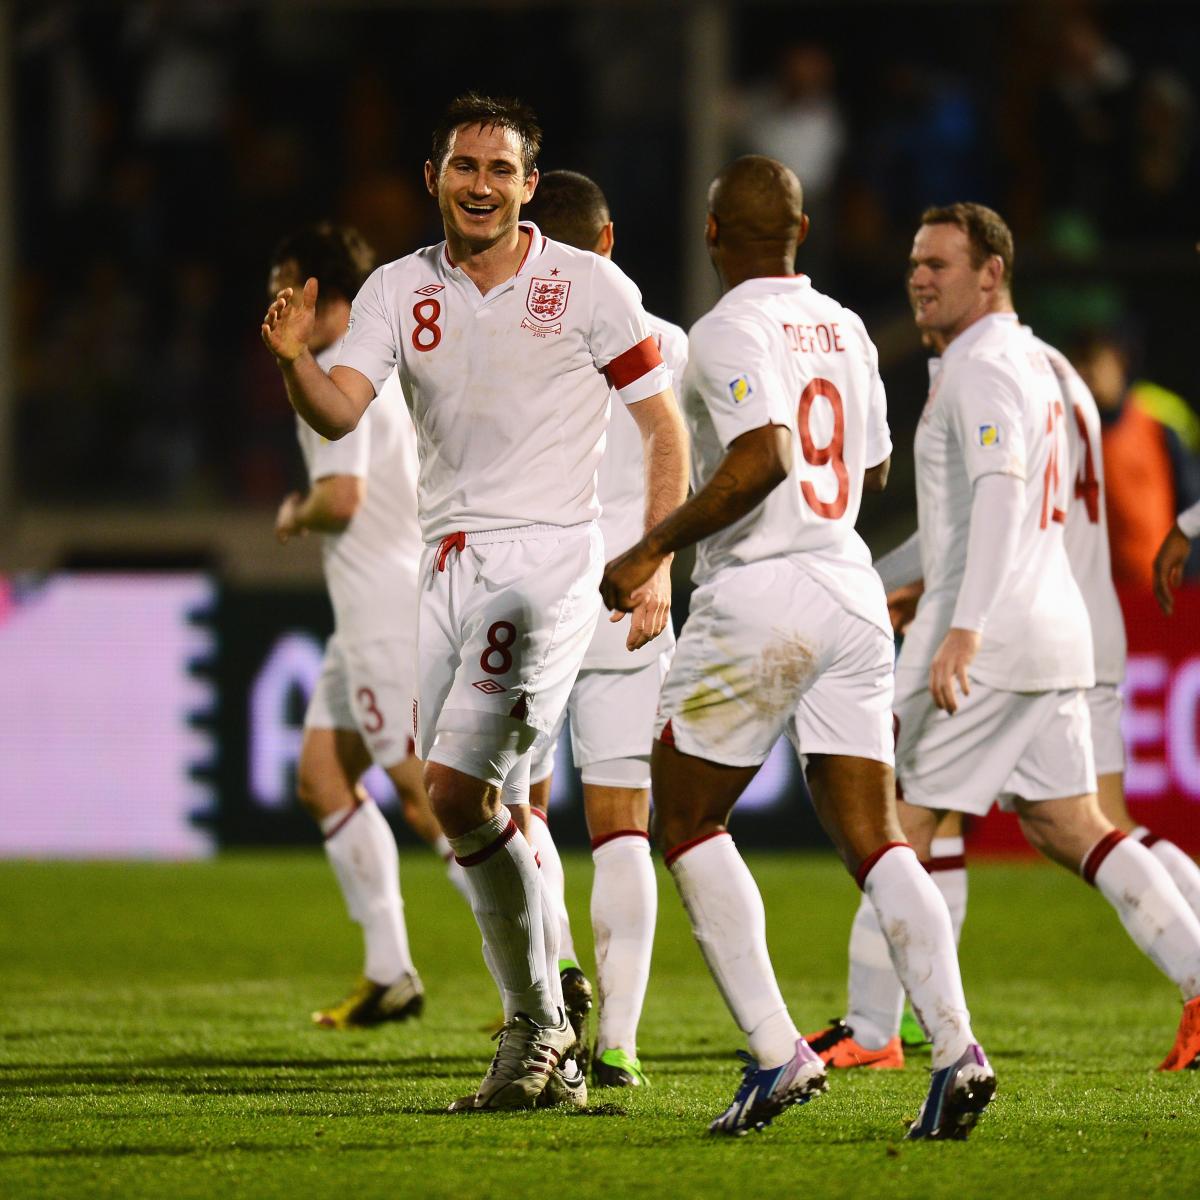 San Marino vs. England: 6 Things We Learned from England's 8-0 Victory